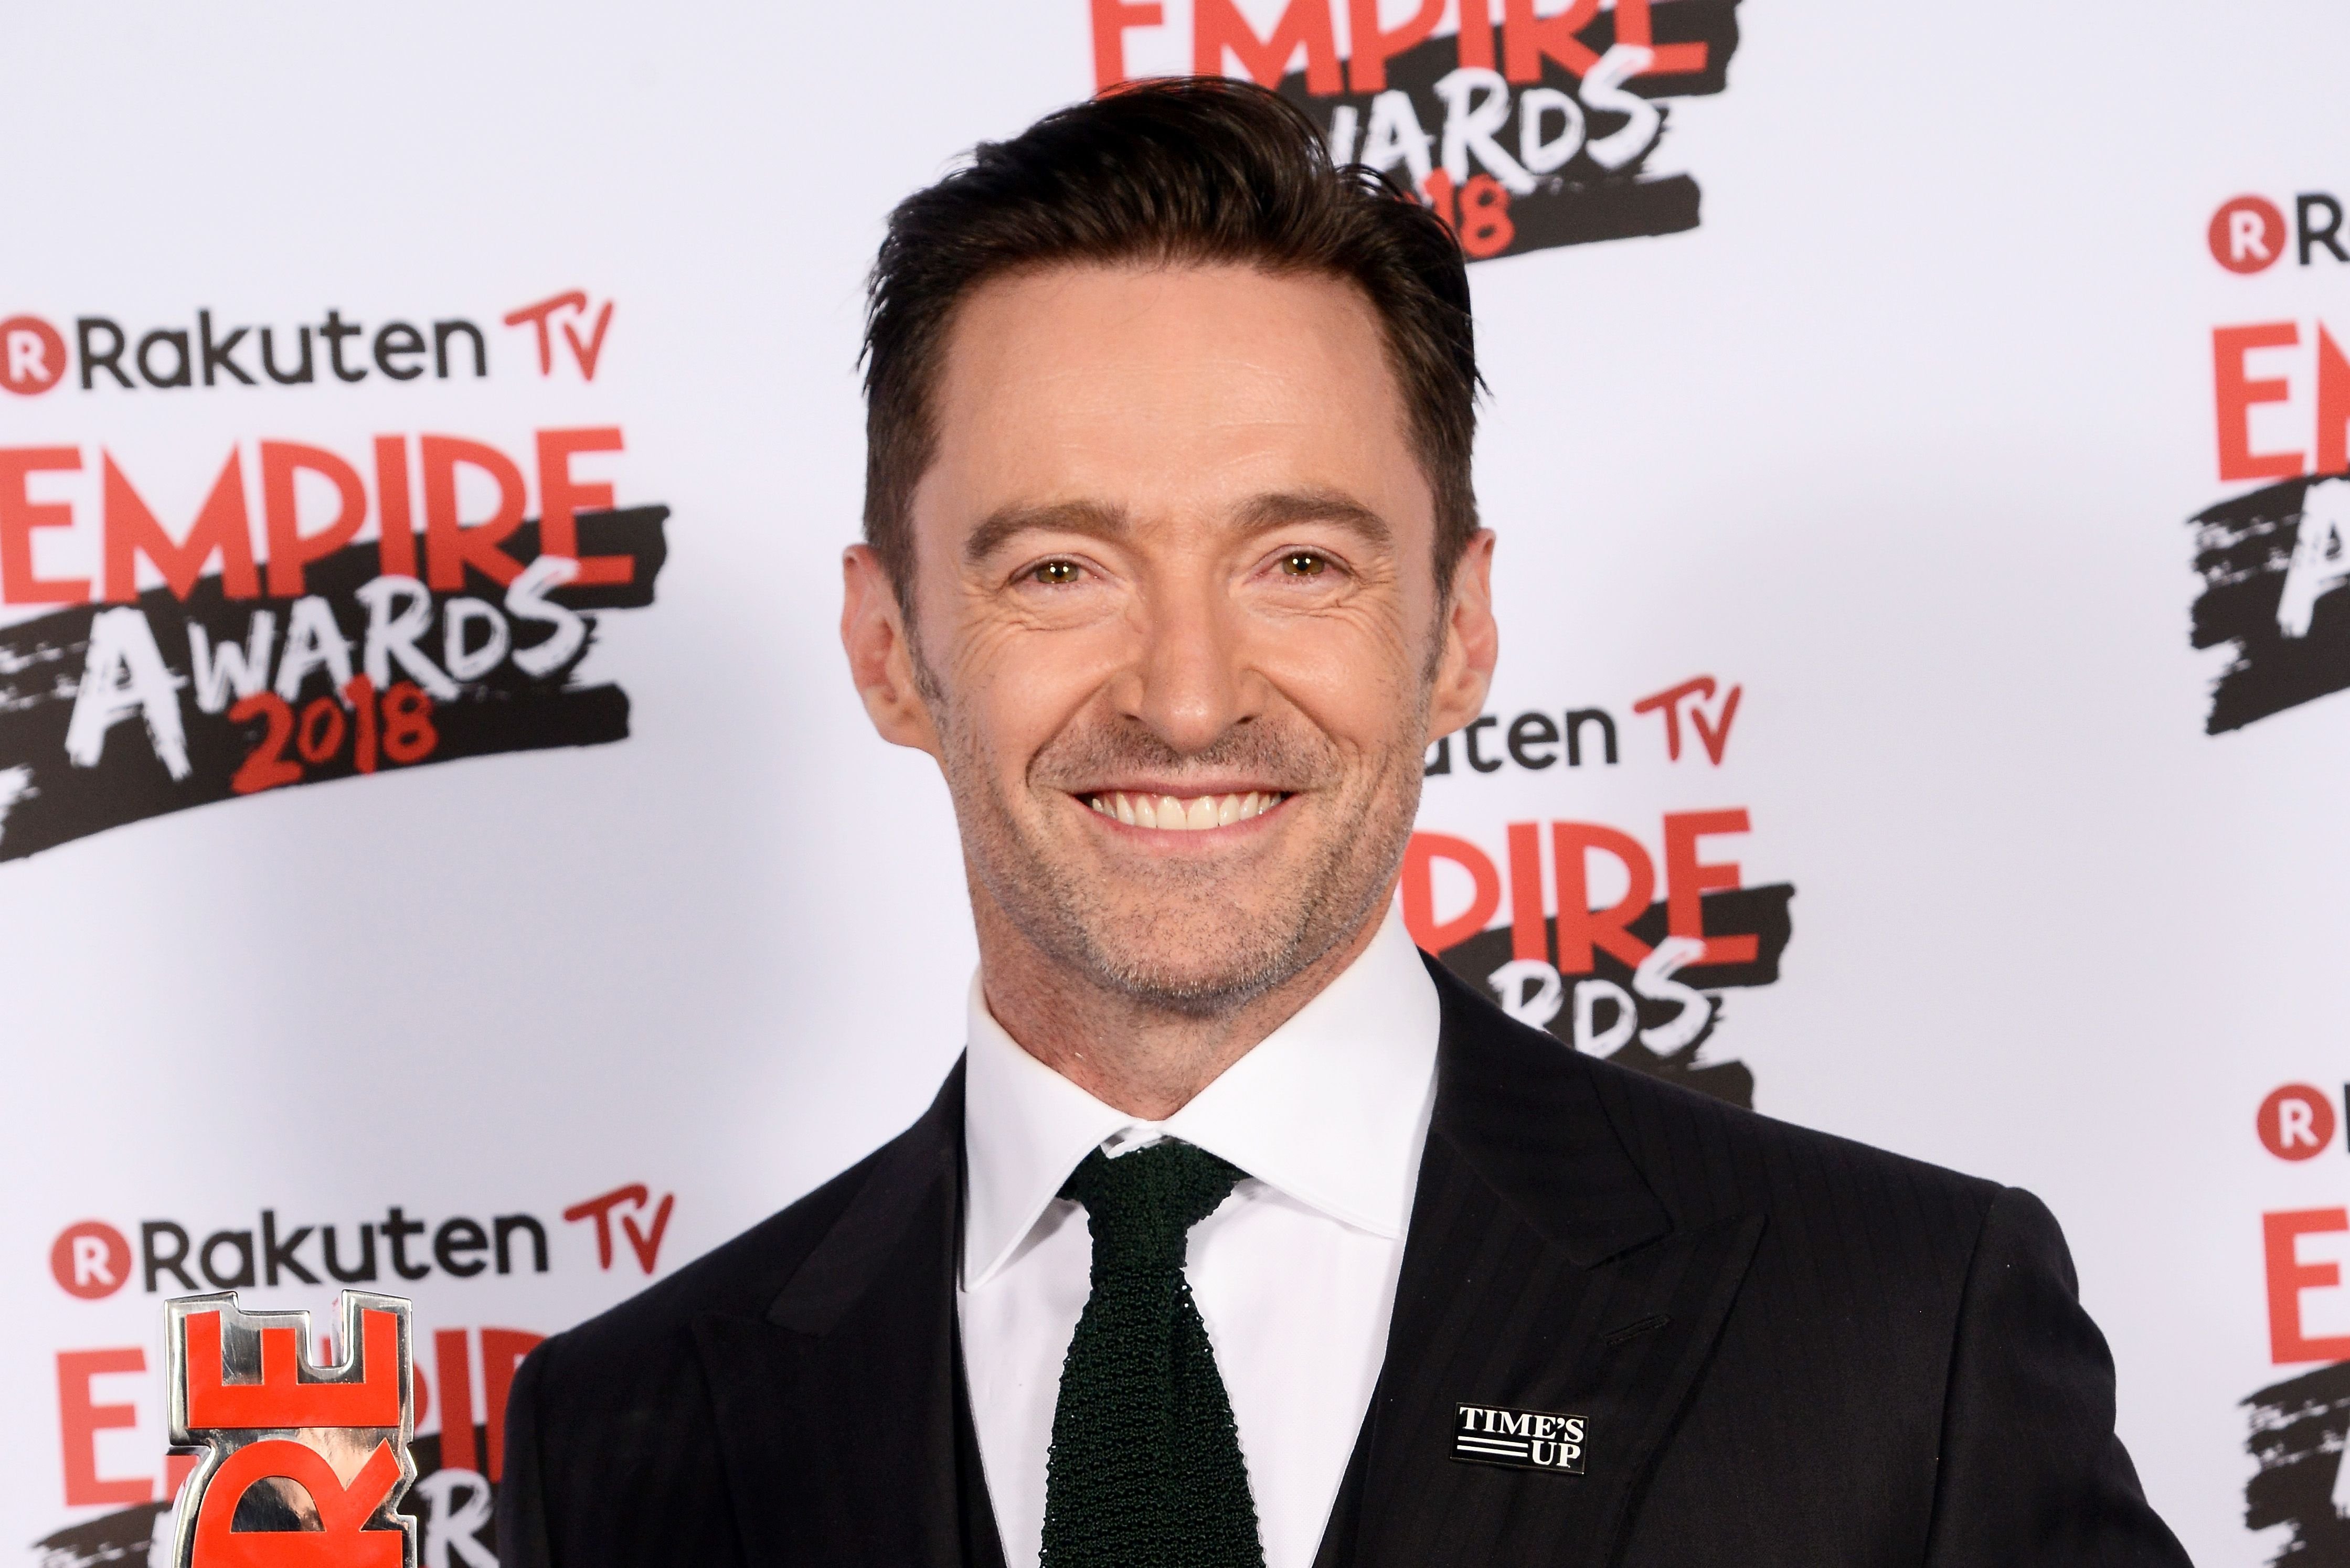 Hugh Jackman at the Rakuten TV EMPIRE Awards 2018 at The Roundhouse on March 18, 2018 in London, England. | Photo: Getty Images